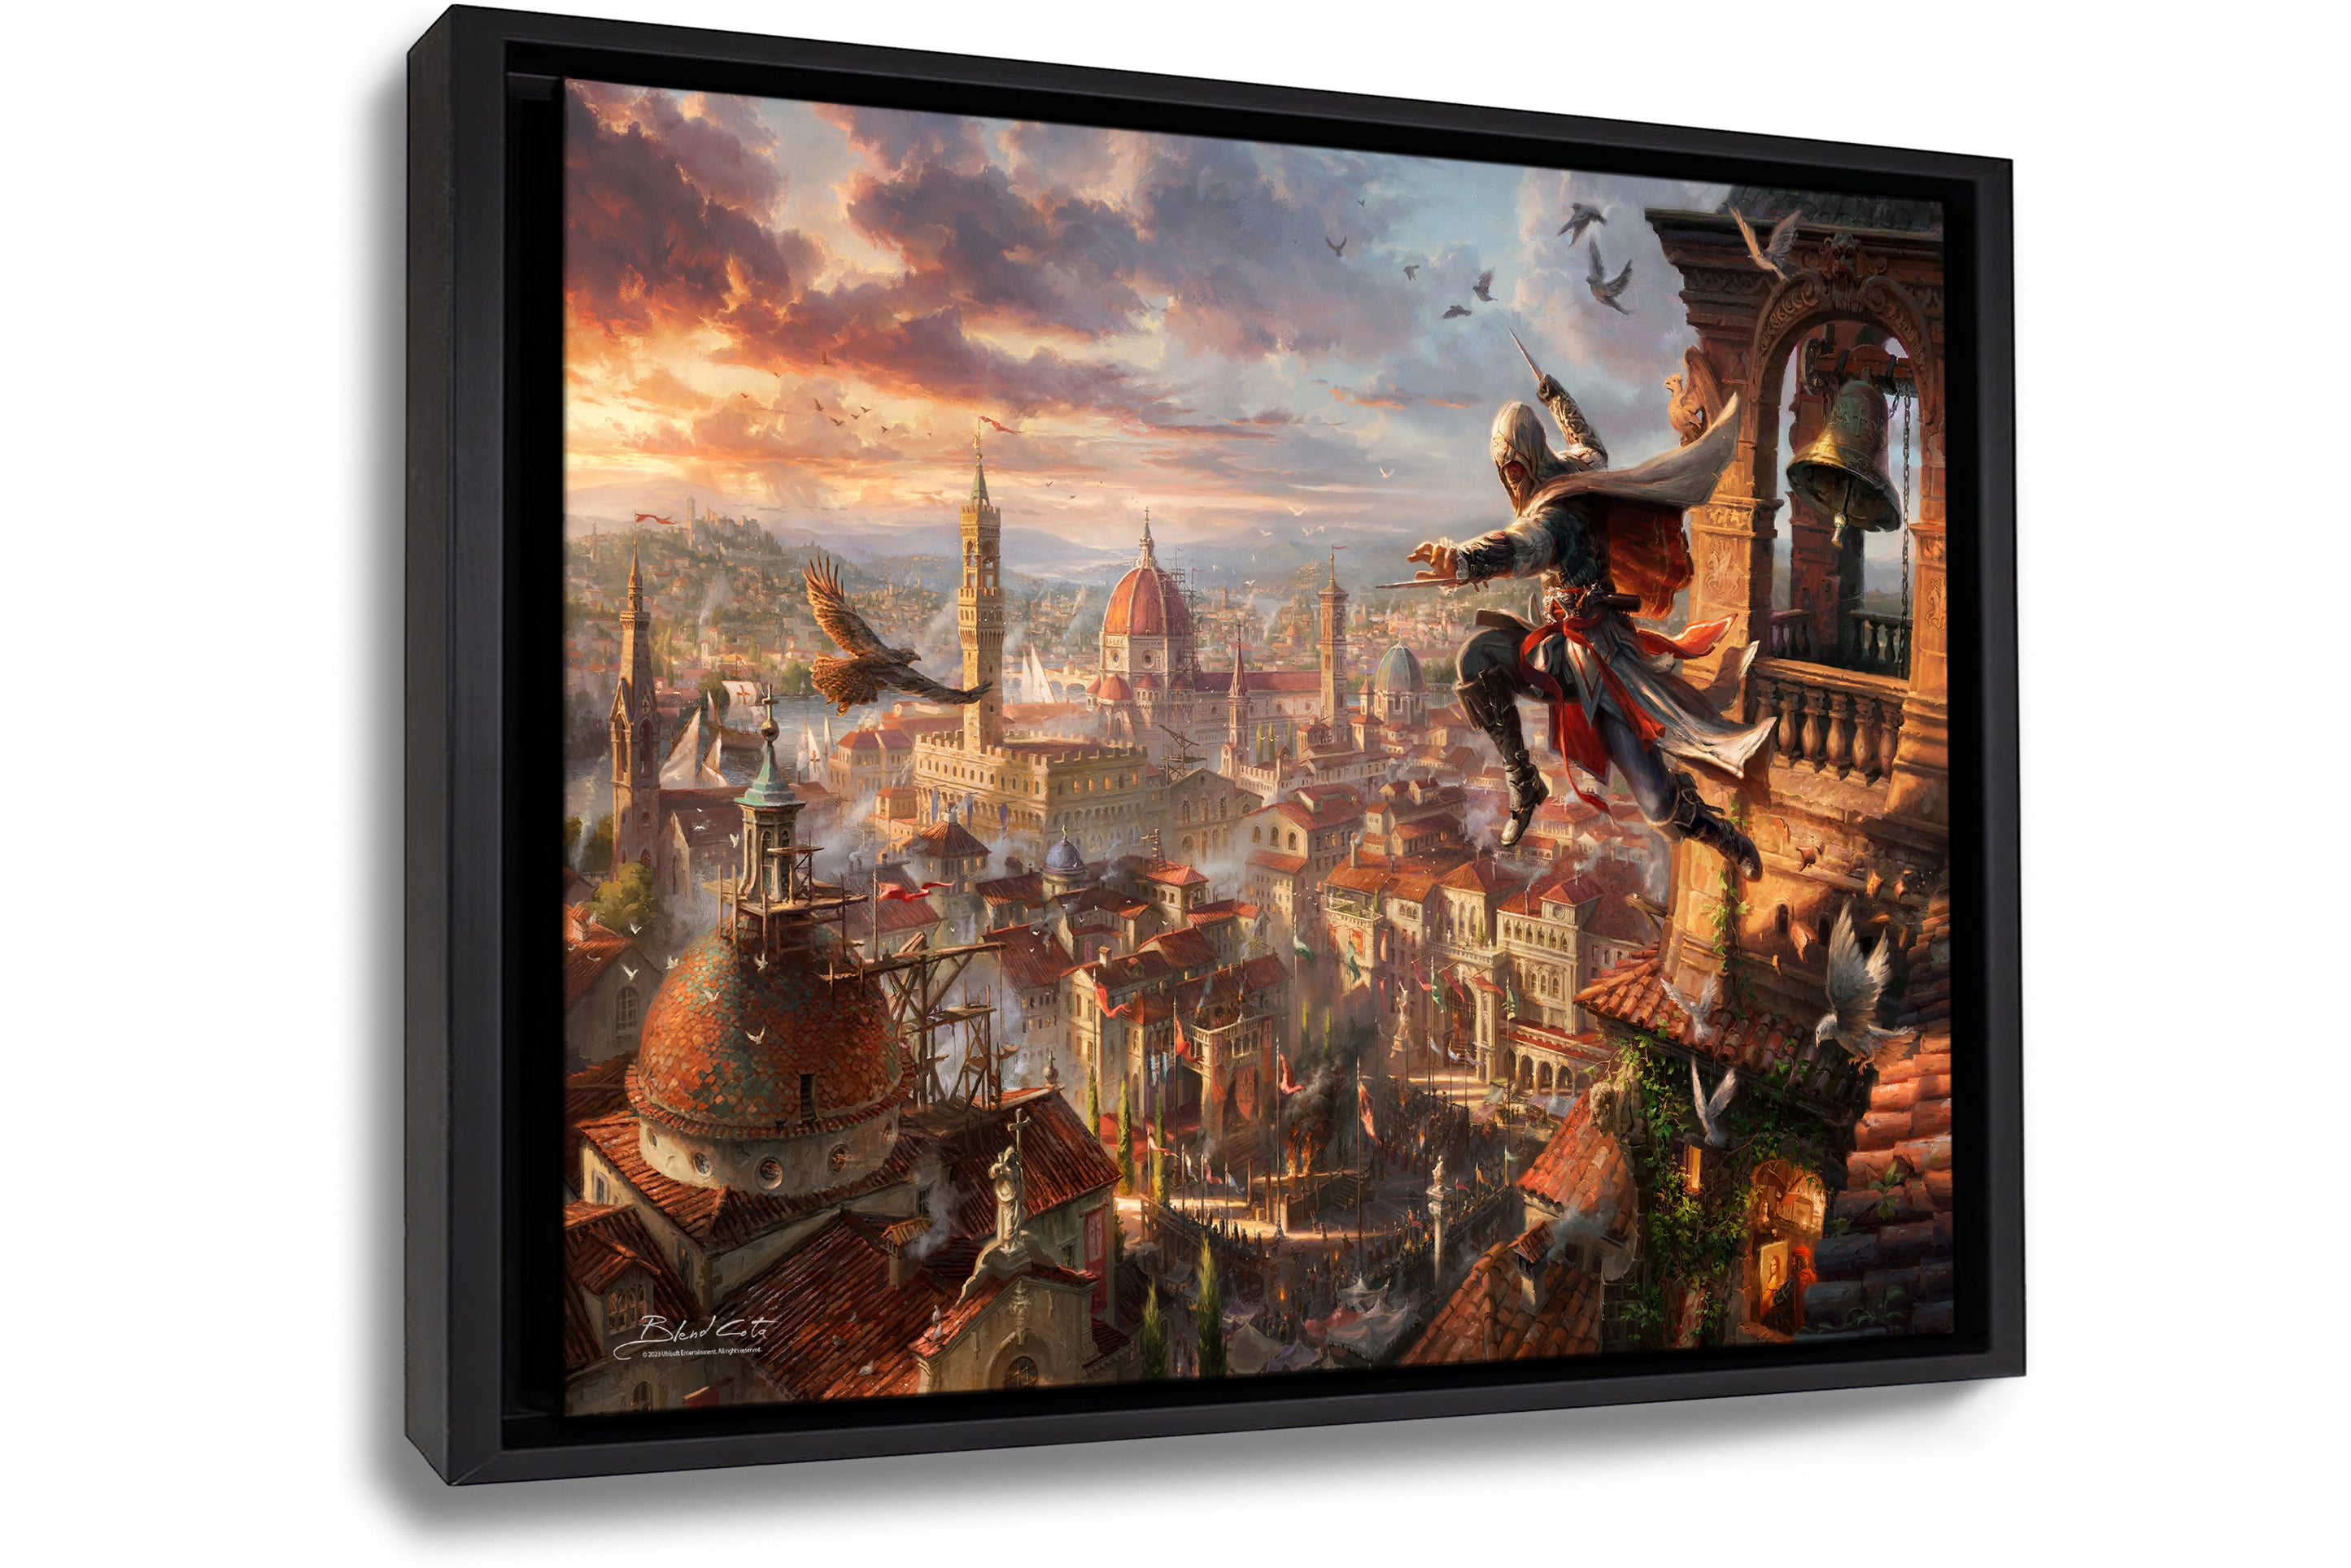 
                  
                    Framed art print on canvas of Assassin's Creed Florence and Ezio Auditore meticulously designed and painted with intricate details in a realistic style.
                  
                